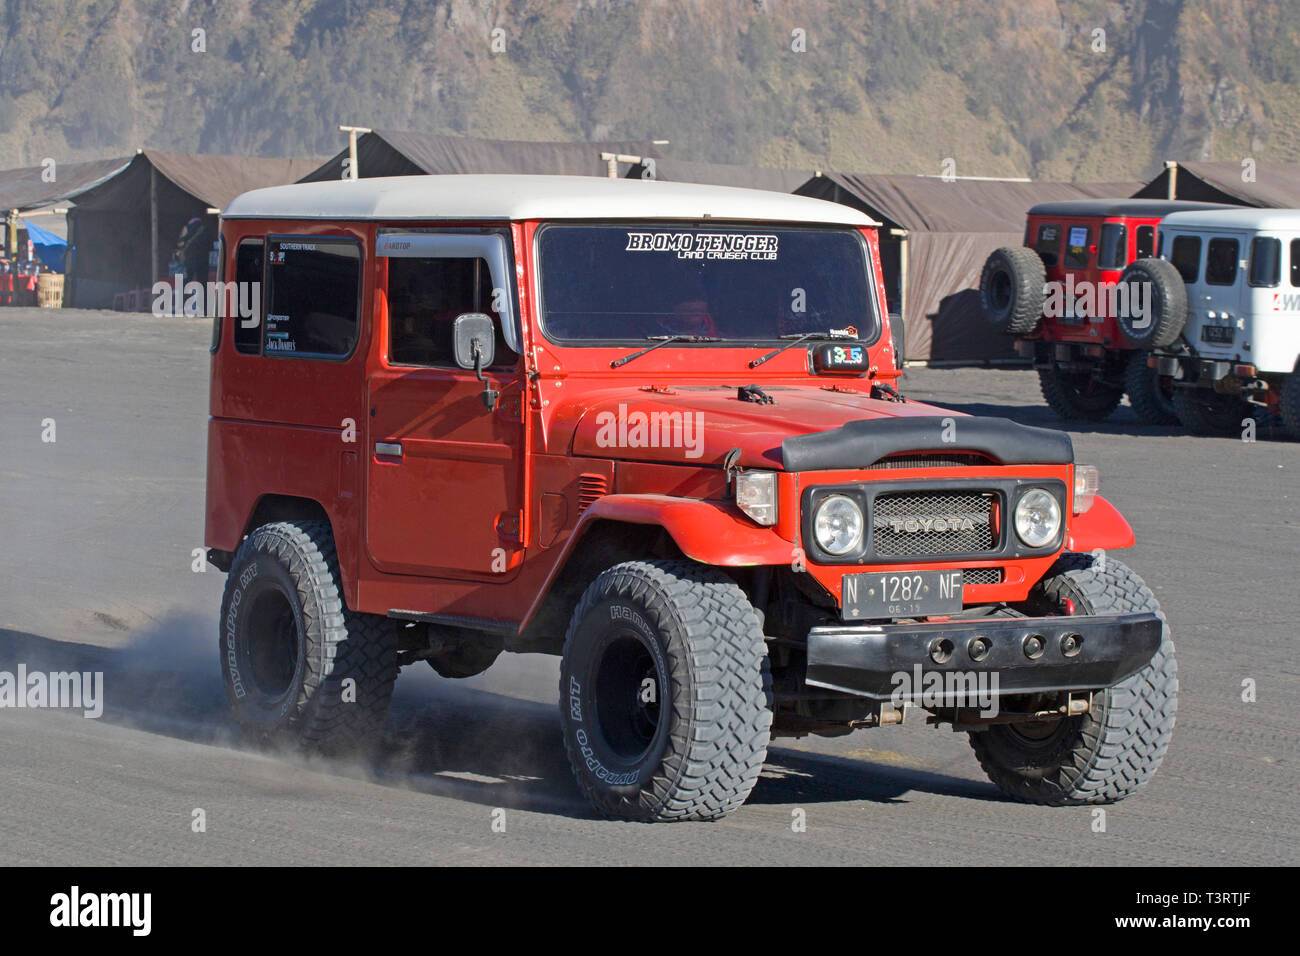 Toyota landcriuser fj40 / bj40 model use for tourism at Mount Bromo . Bromo is one of the most visited tourist attractions Stock Photo